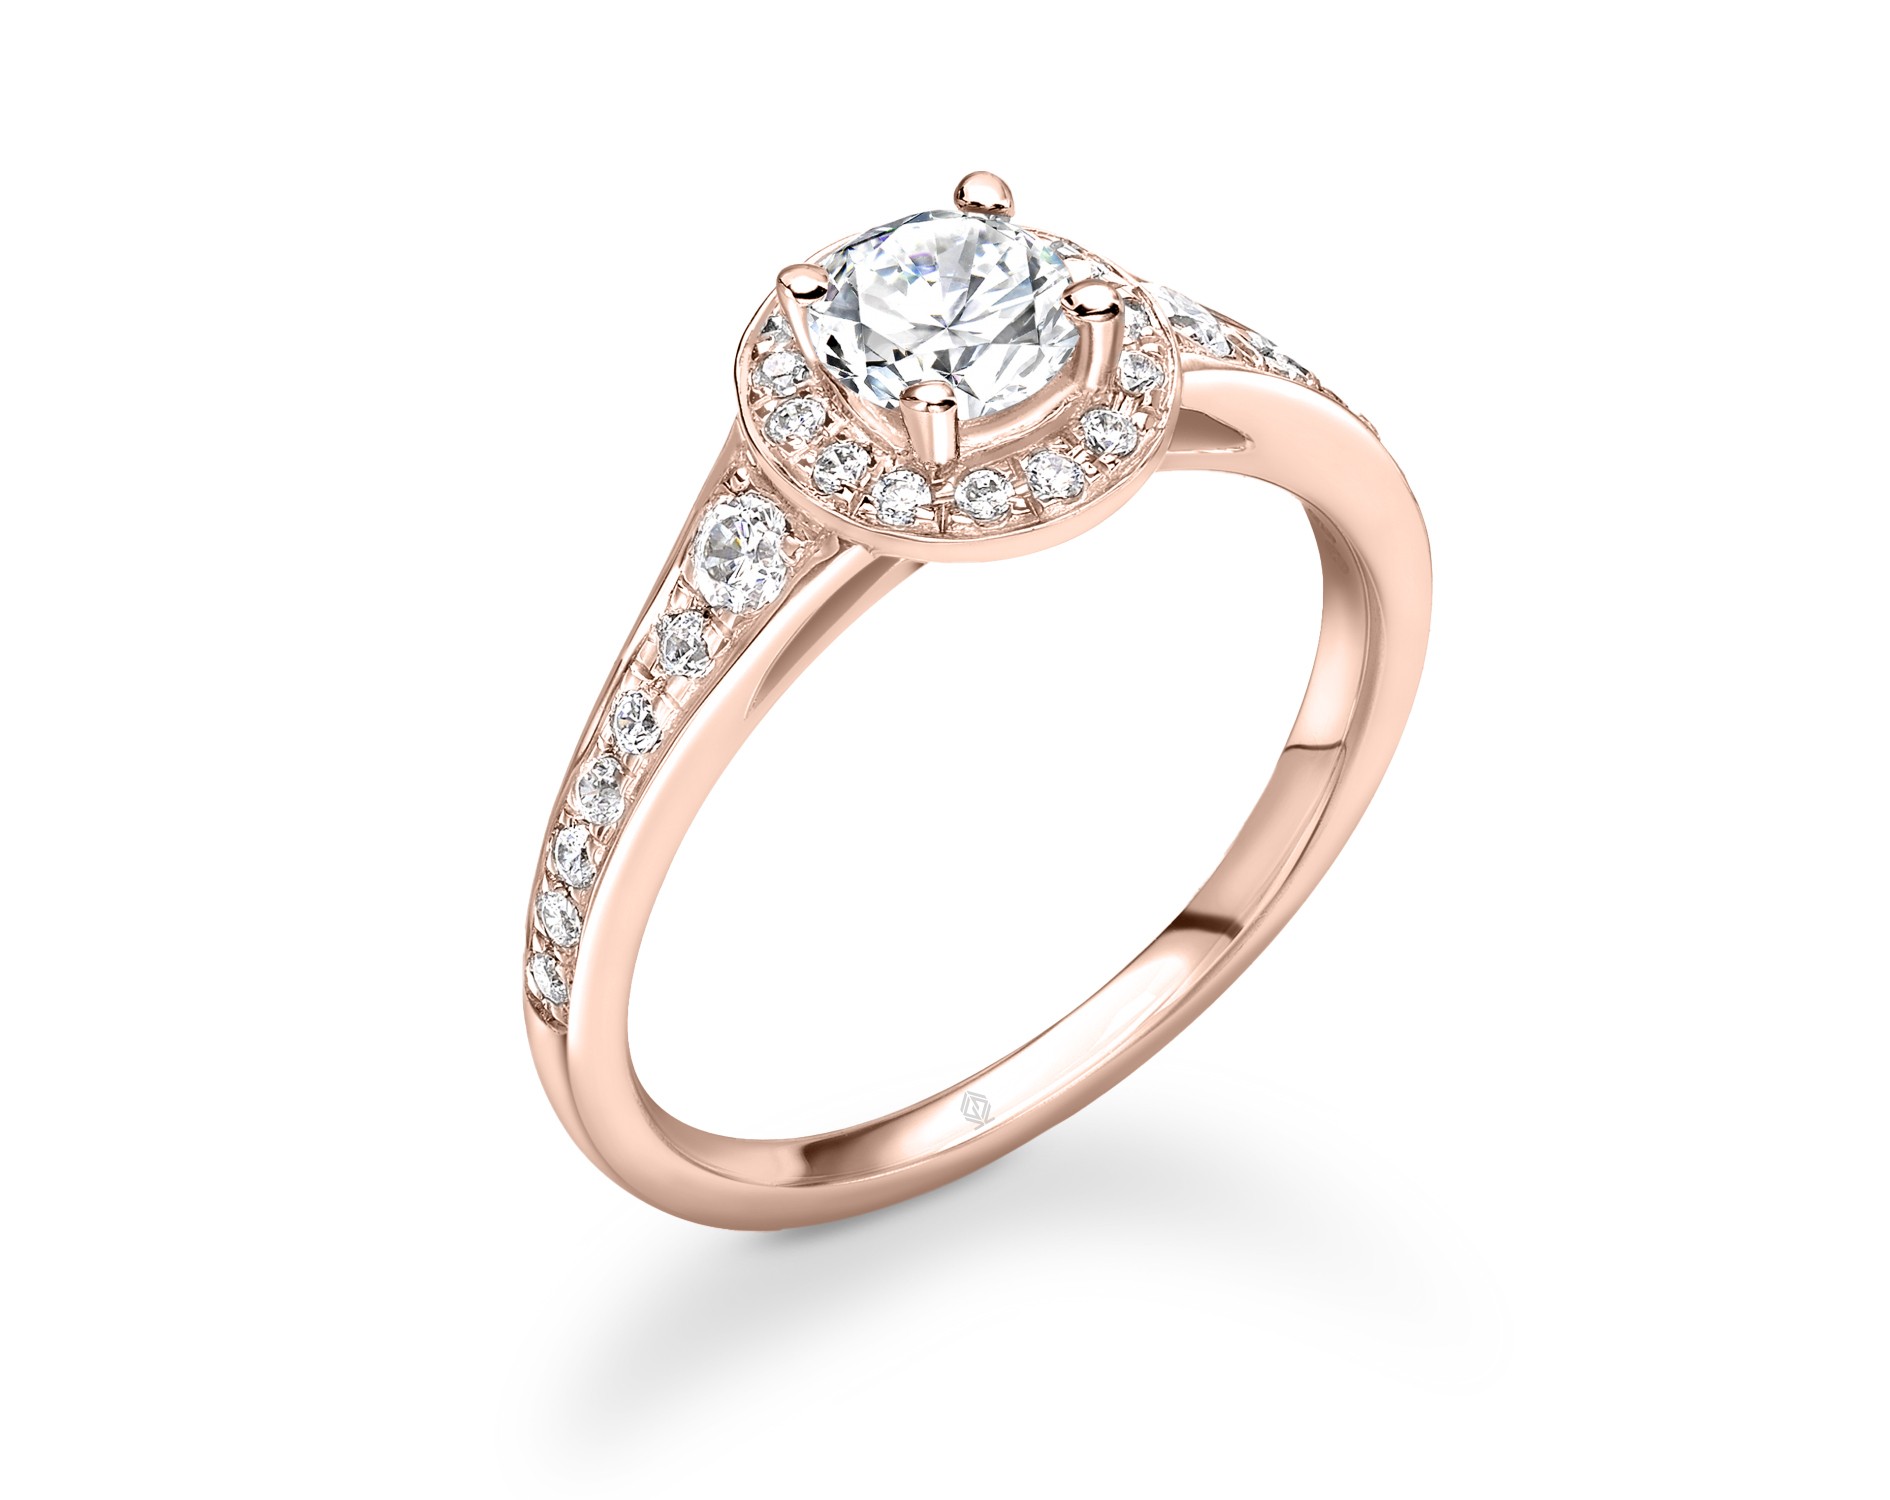 18K ROSE GOLD ROUND CUT HALO DIAMOND ENGAGEMENT RING WITH SIDE STONES CHANNEL SET